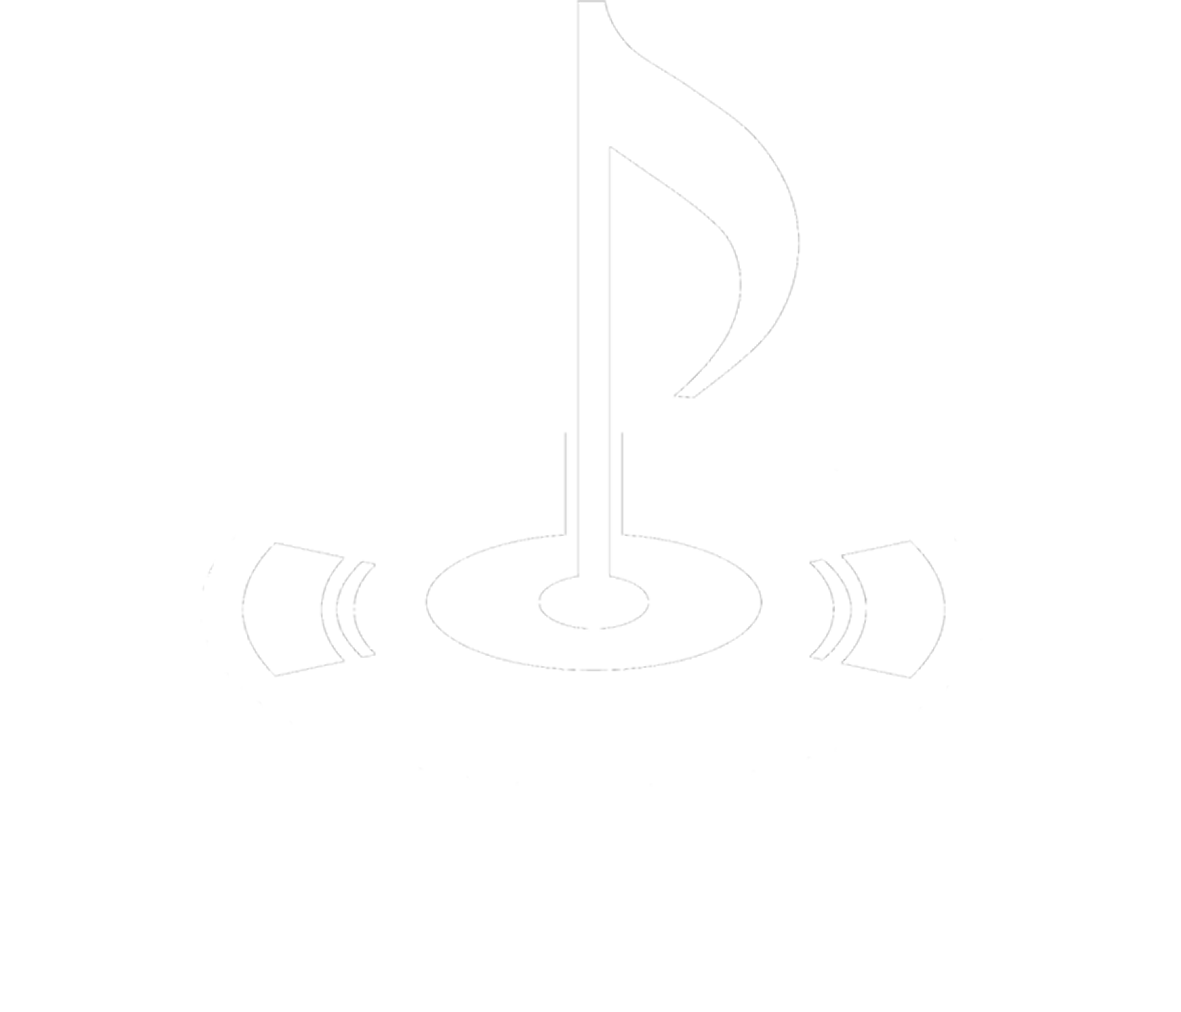 ON THE RECORD 